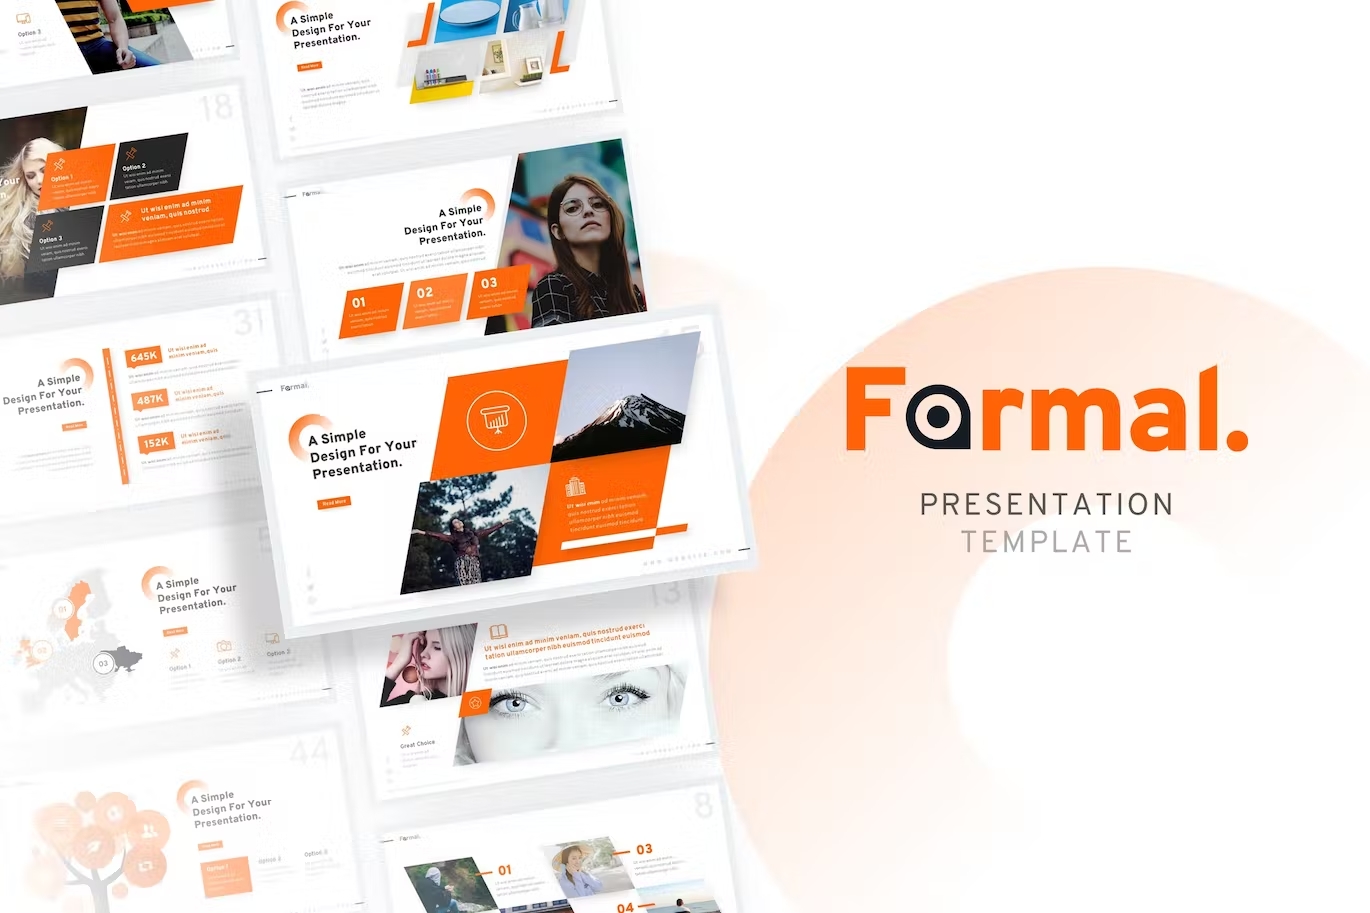 White and orange template for formal presentations.